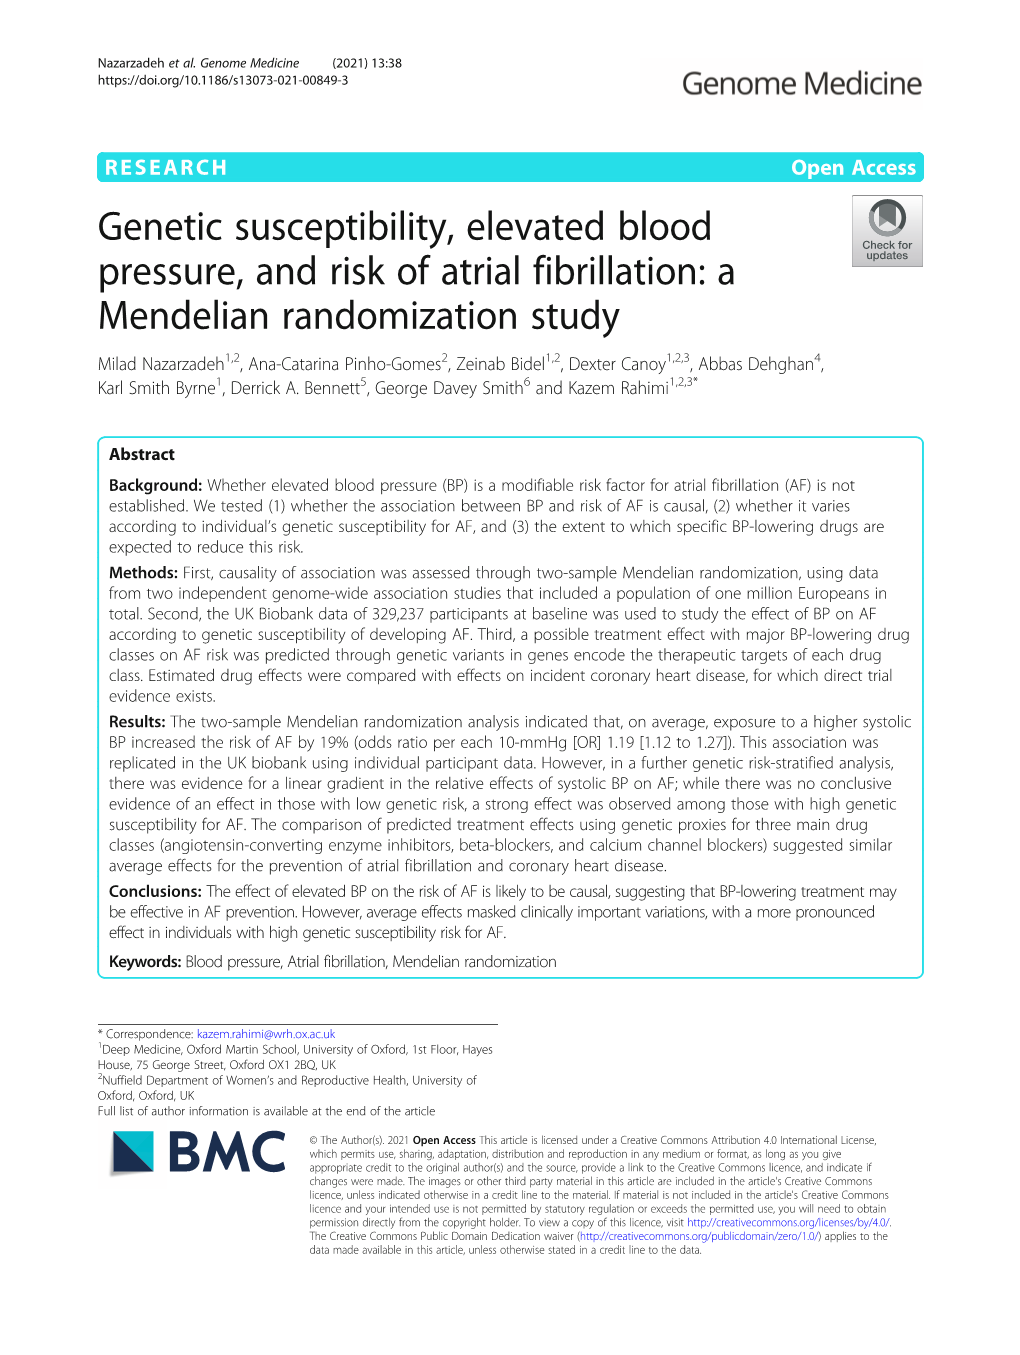 Genetic Susceptibility, Elevated Blood Pressure, and Risk of Atrial Fibrillation